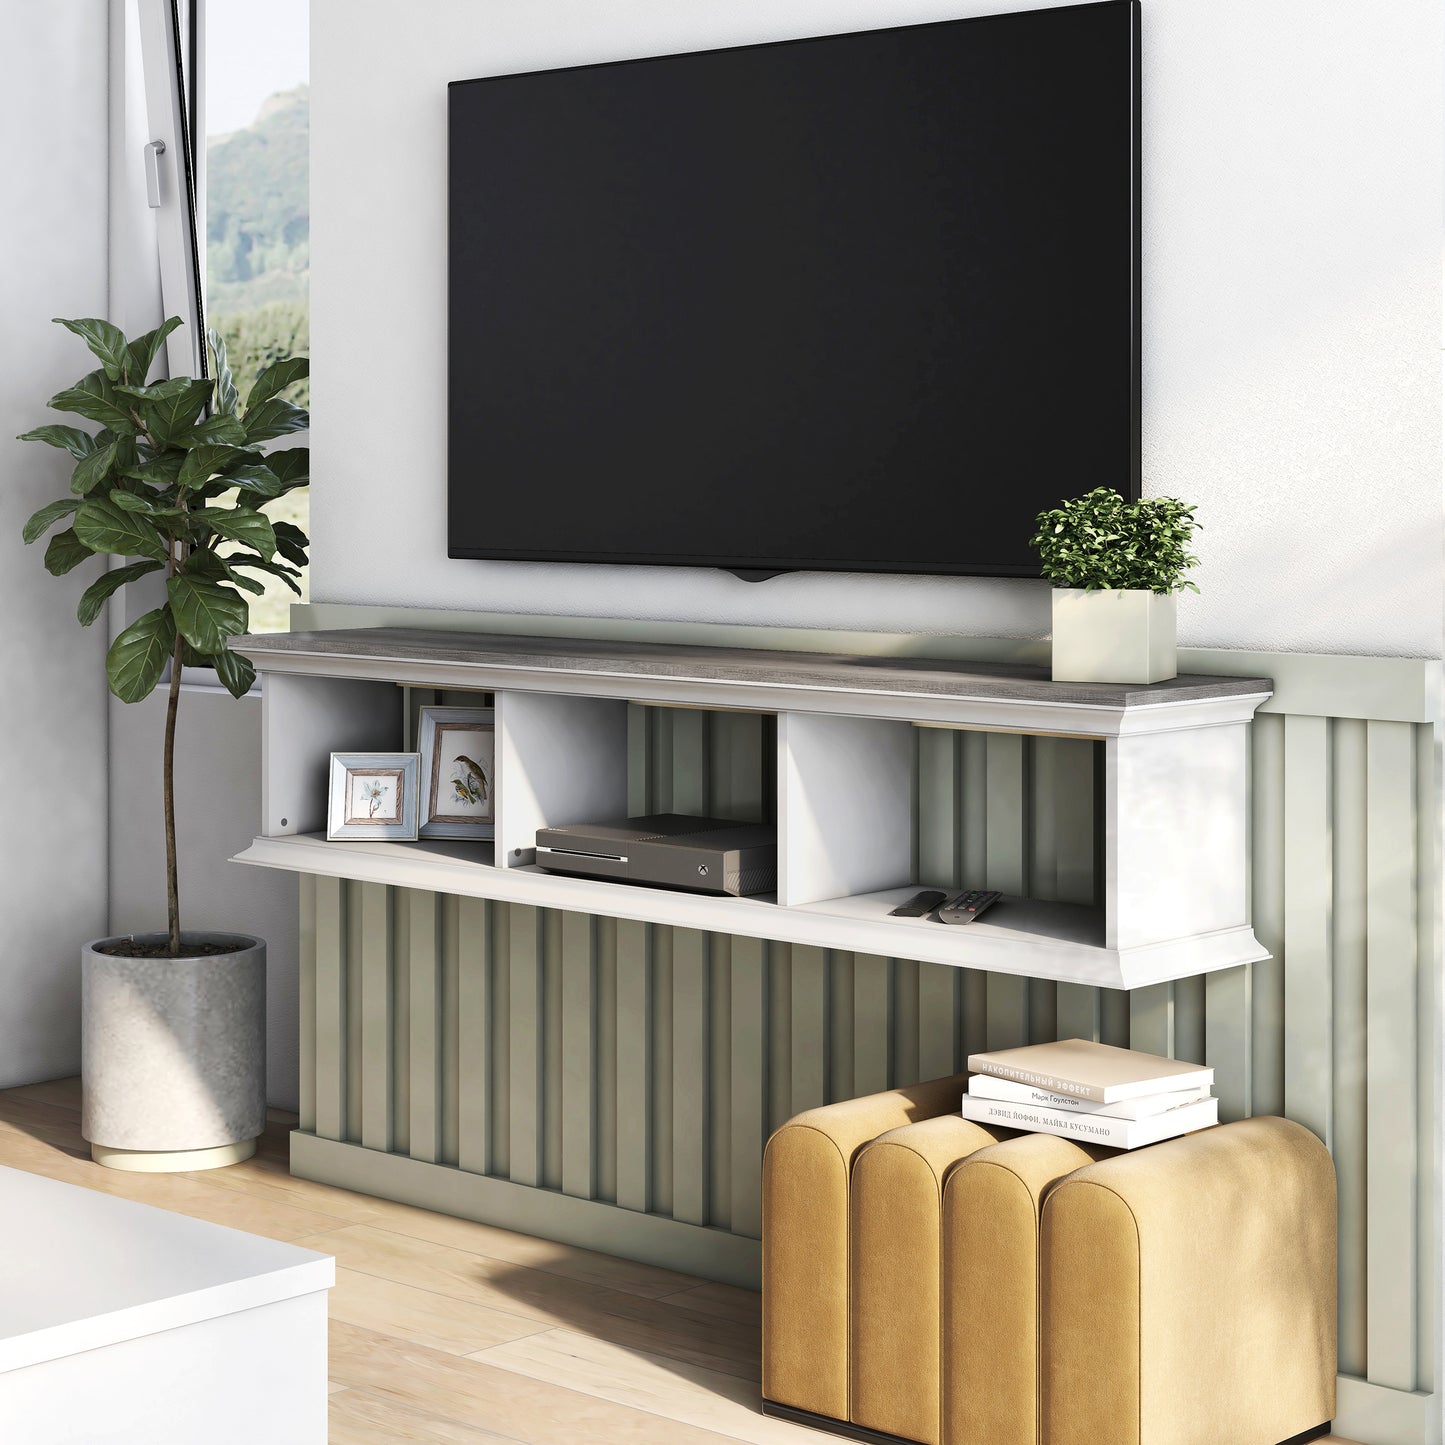 Left angled transitional vintage gray oak and white floating TV stand with three shelves in a living room with accessories